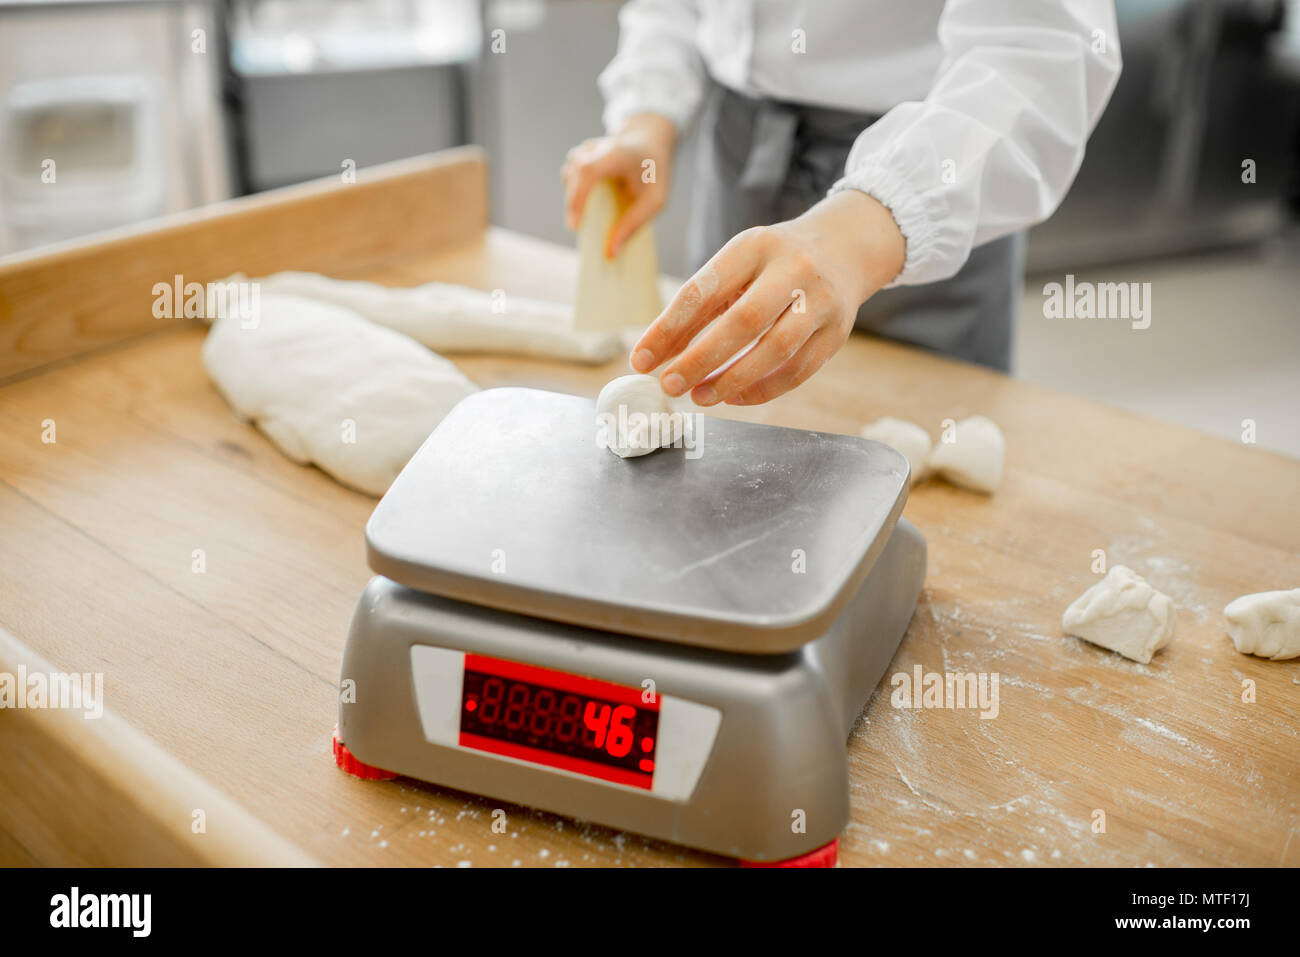 Baker weighing dough portions for baking buns at the manufacturig, close-up view Stock Photo